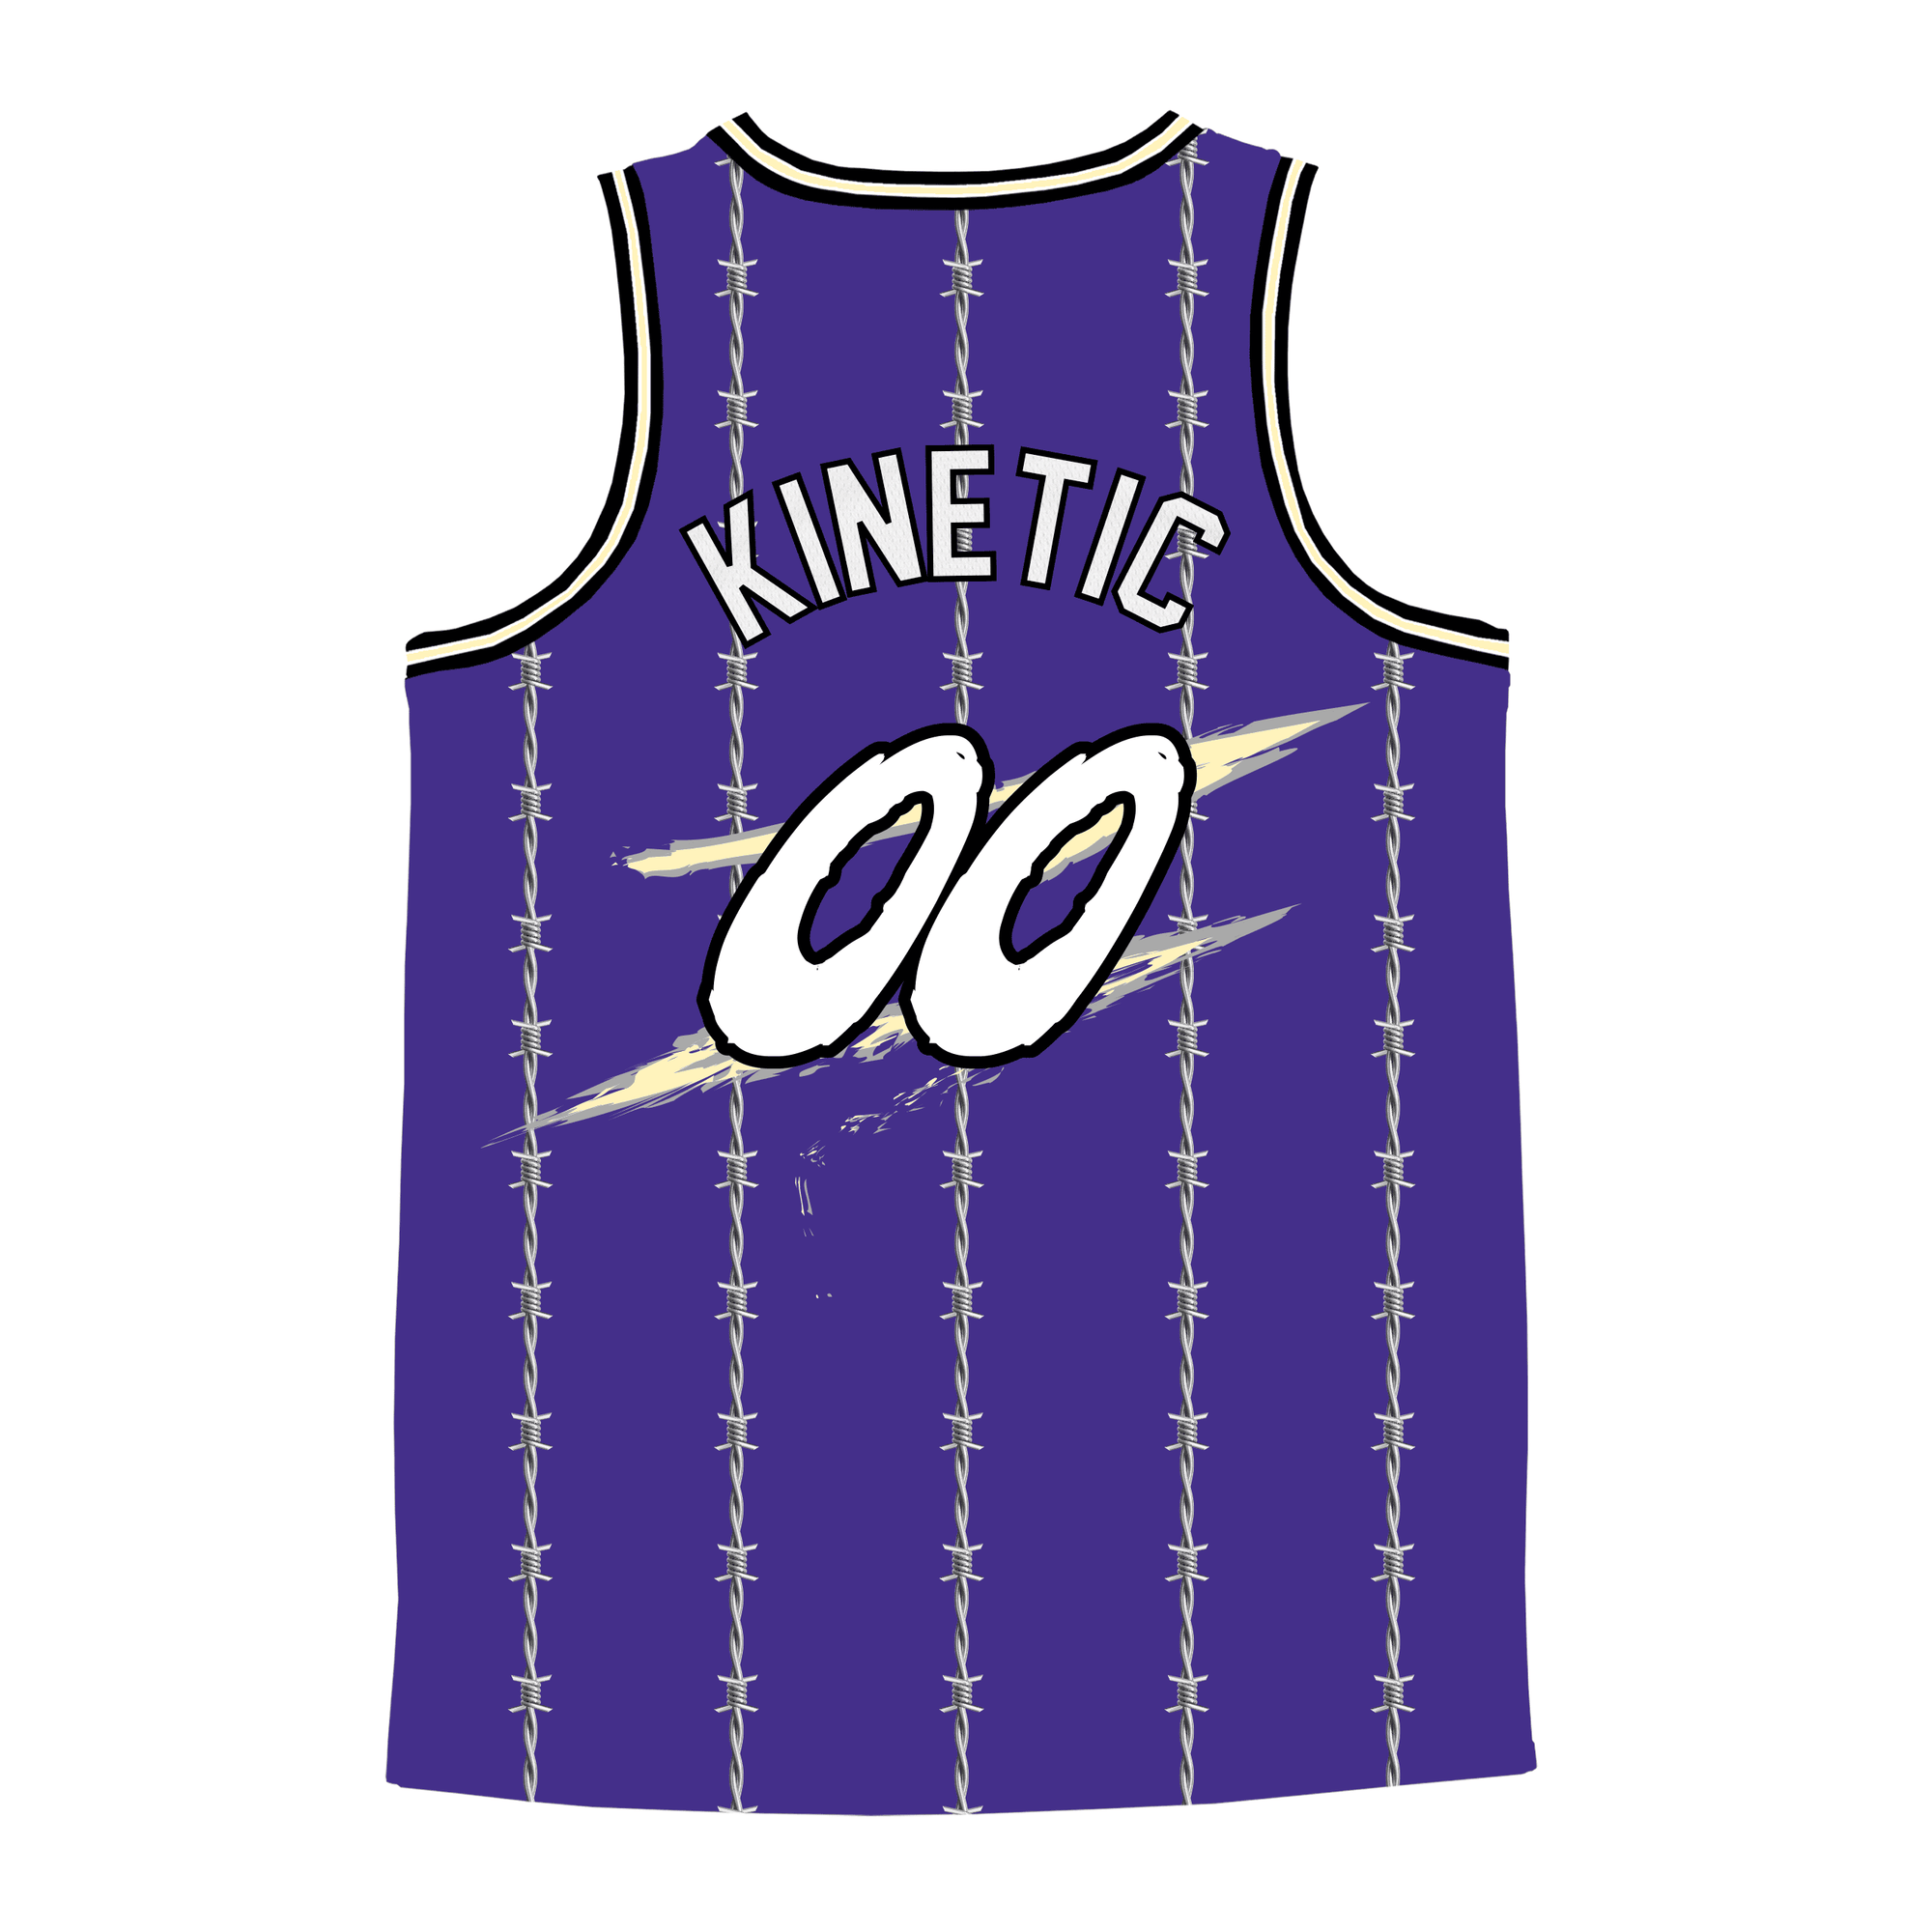 Phi Kappa Psi - Barbed Wire Basketball Jersey